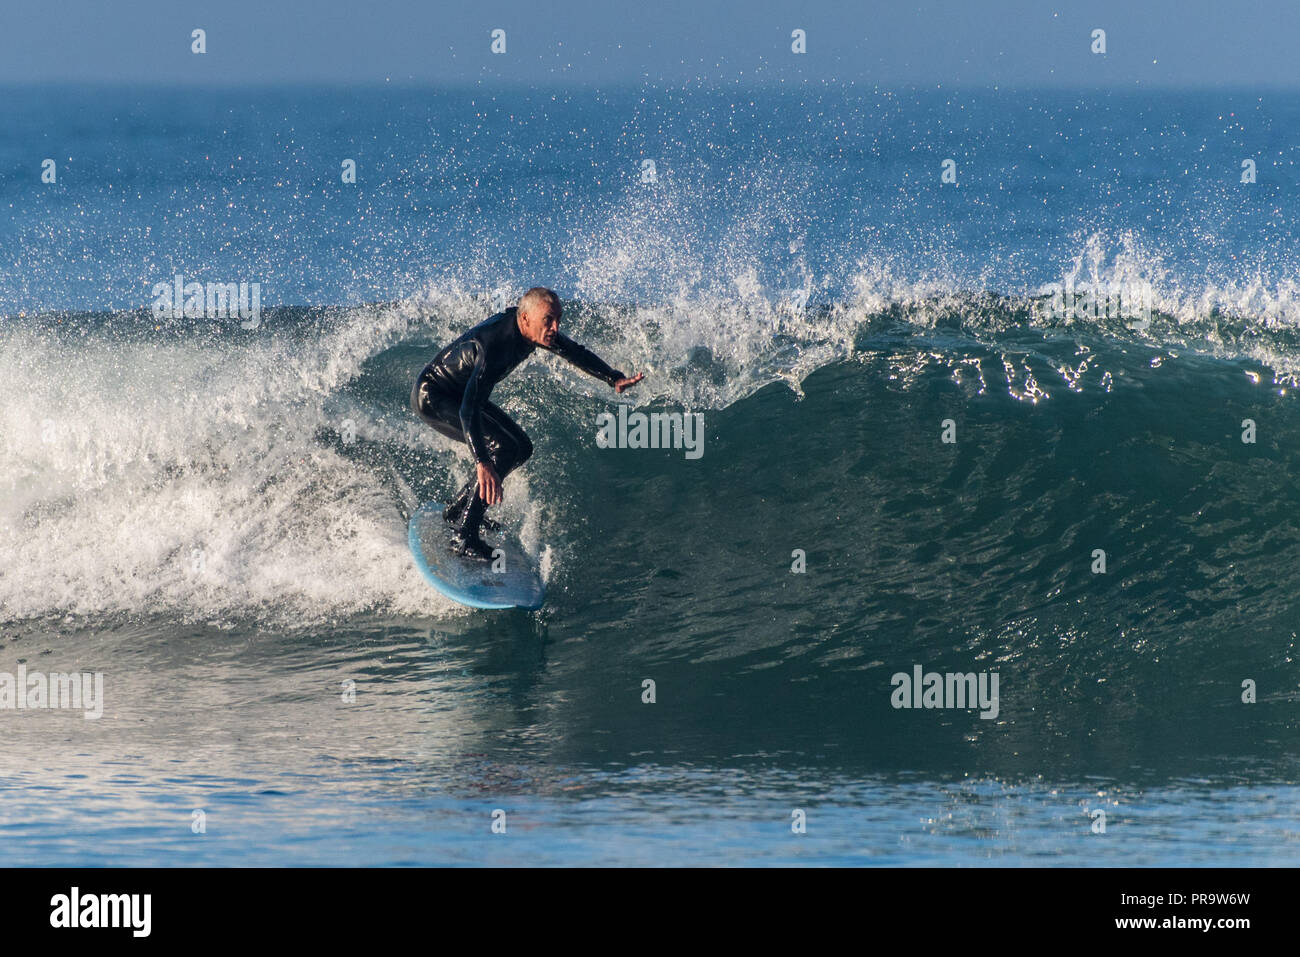 Baby Boomer male surfer dropping into a clean wave pushed by Hurricane Rosa at Ventura's Surfers Knoll on September 30, 2018 in California. Stock Photo